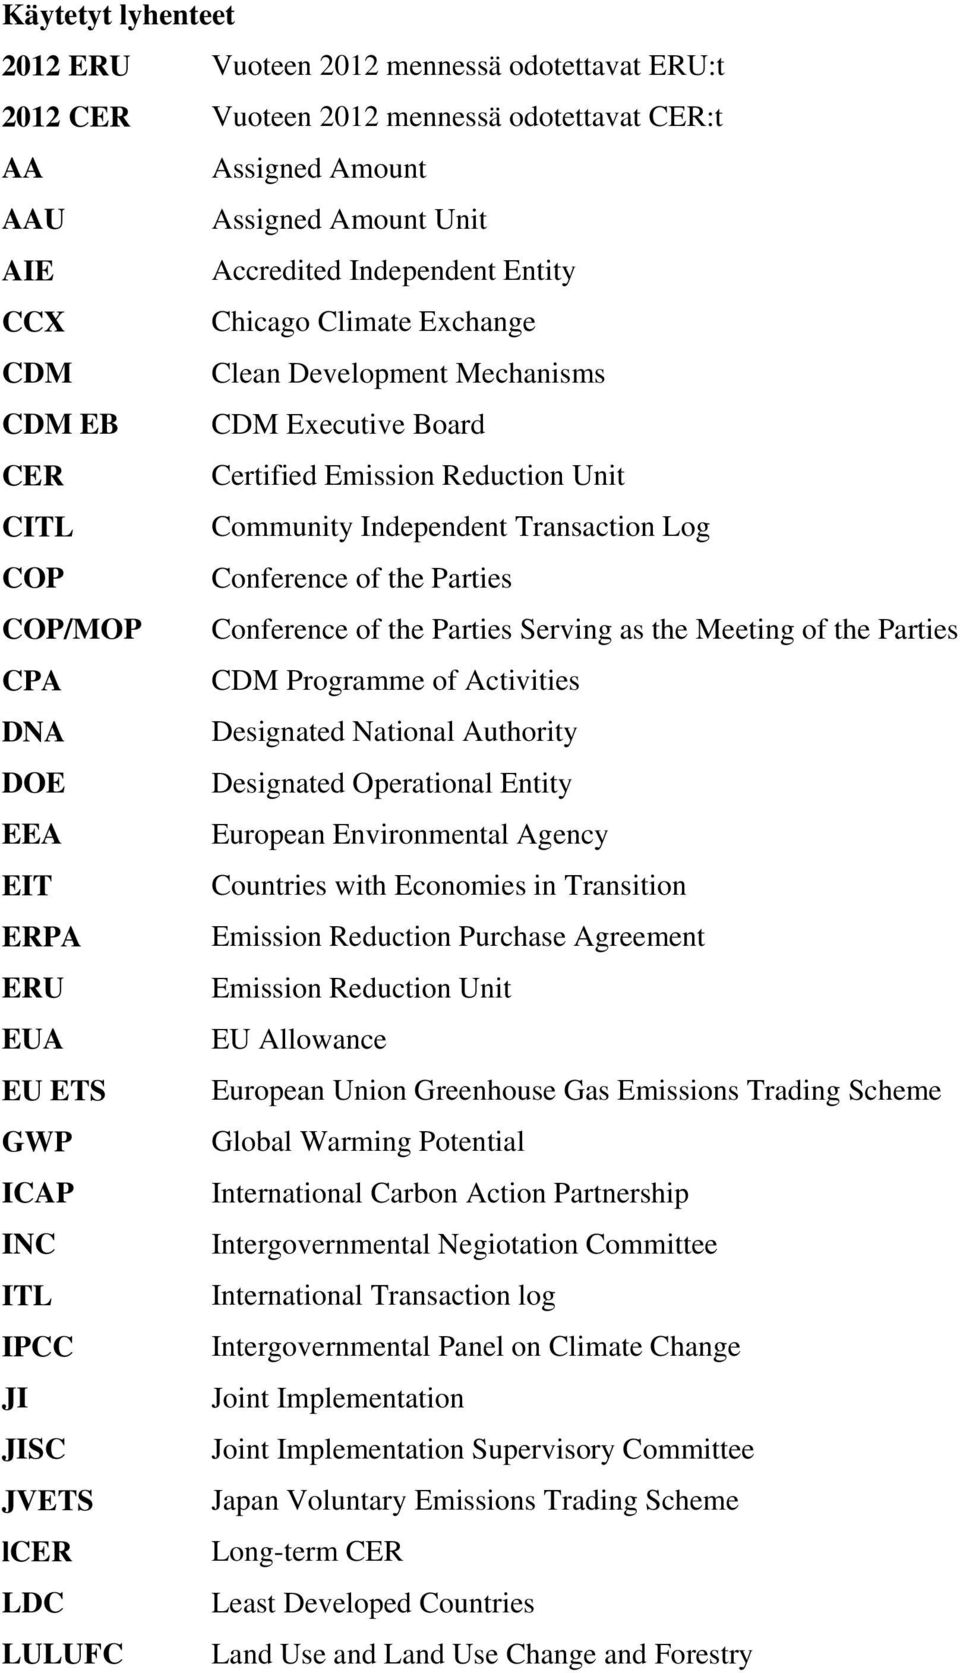 COP/MOP Conference of the Parties Serving as the Meeting of the Parties CPA CDM Programme of Activities DNA Designated National Authority DOE Designated Operational Entity EEA European Environmental